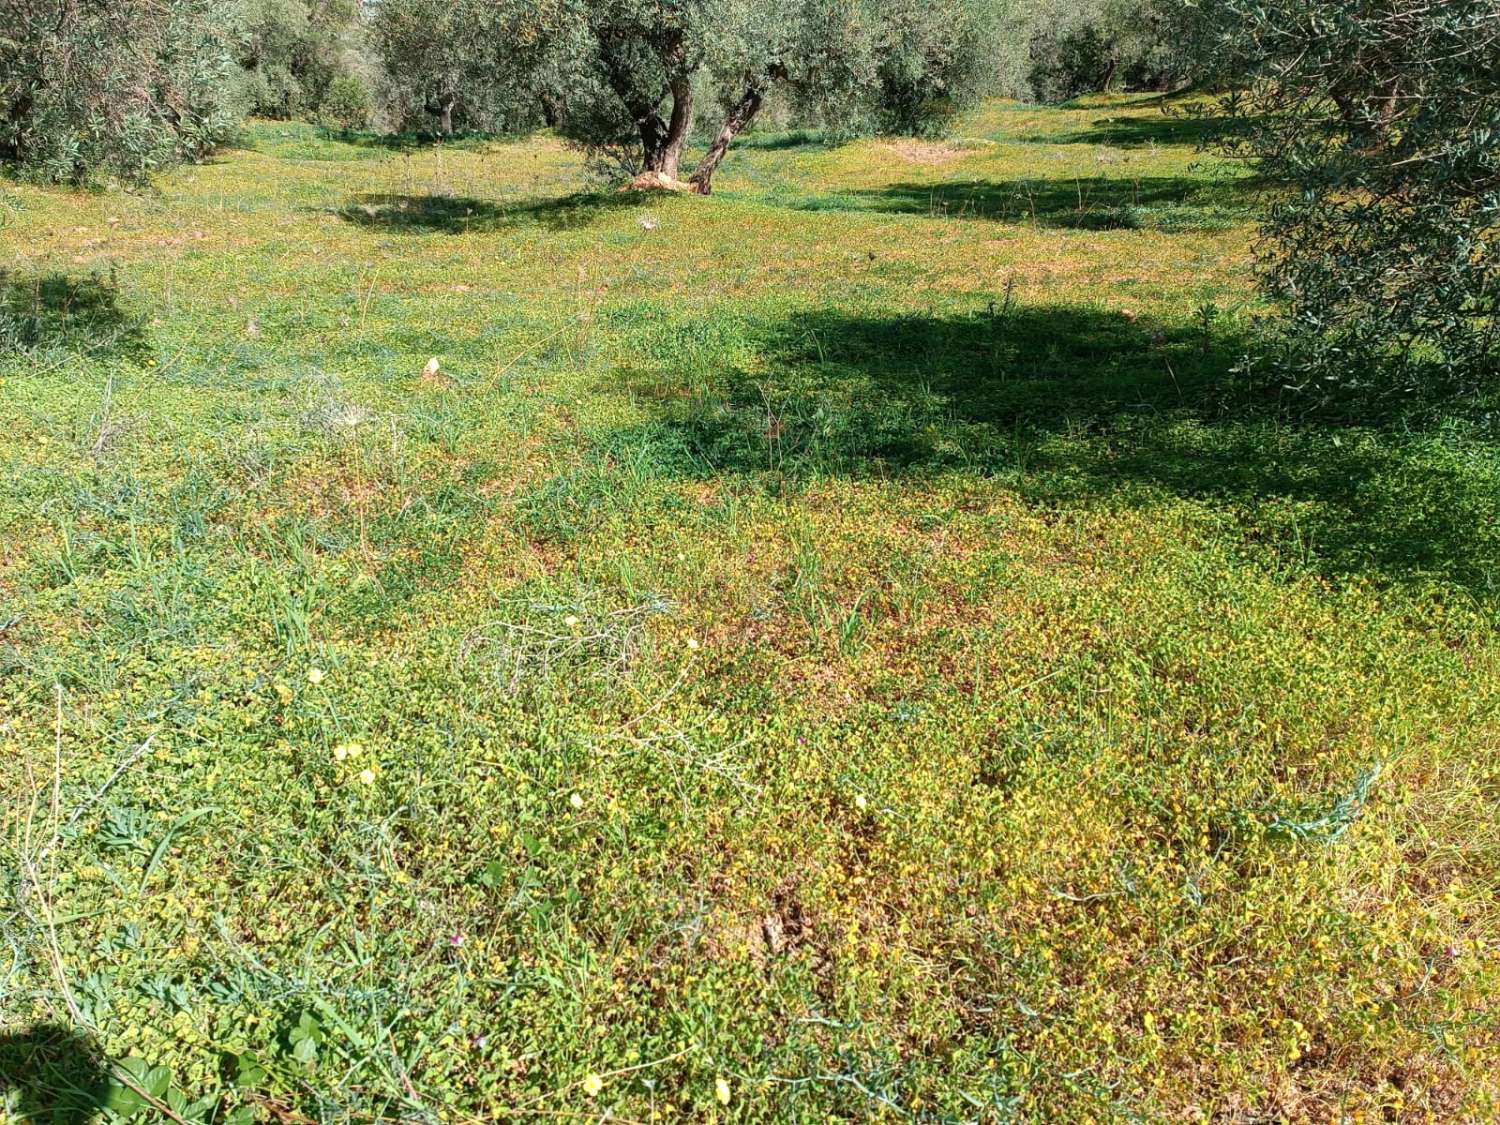 Enolias plot with olive trees